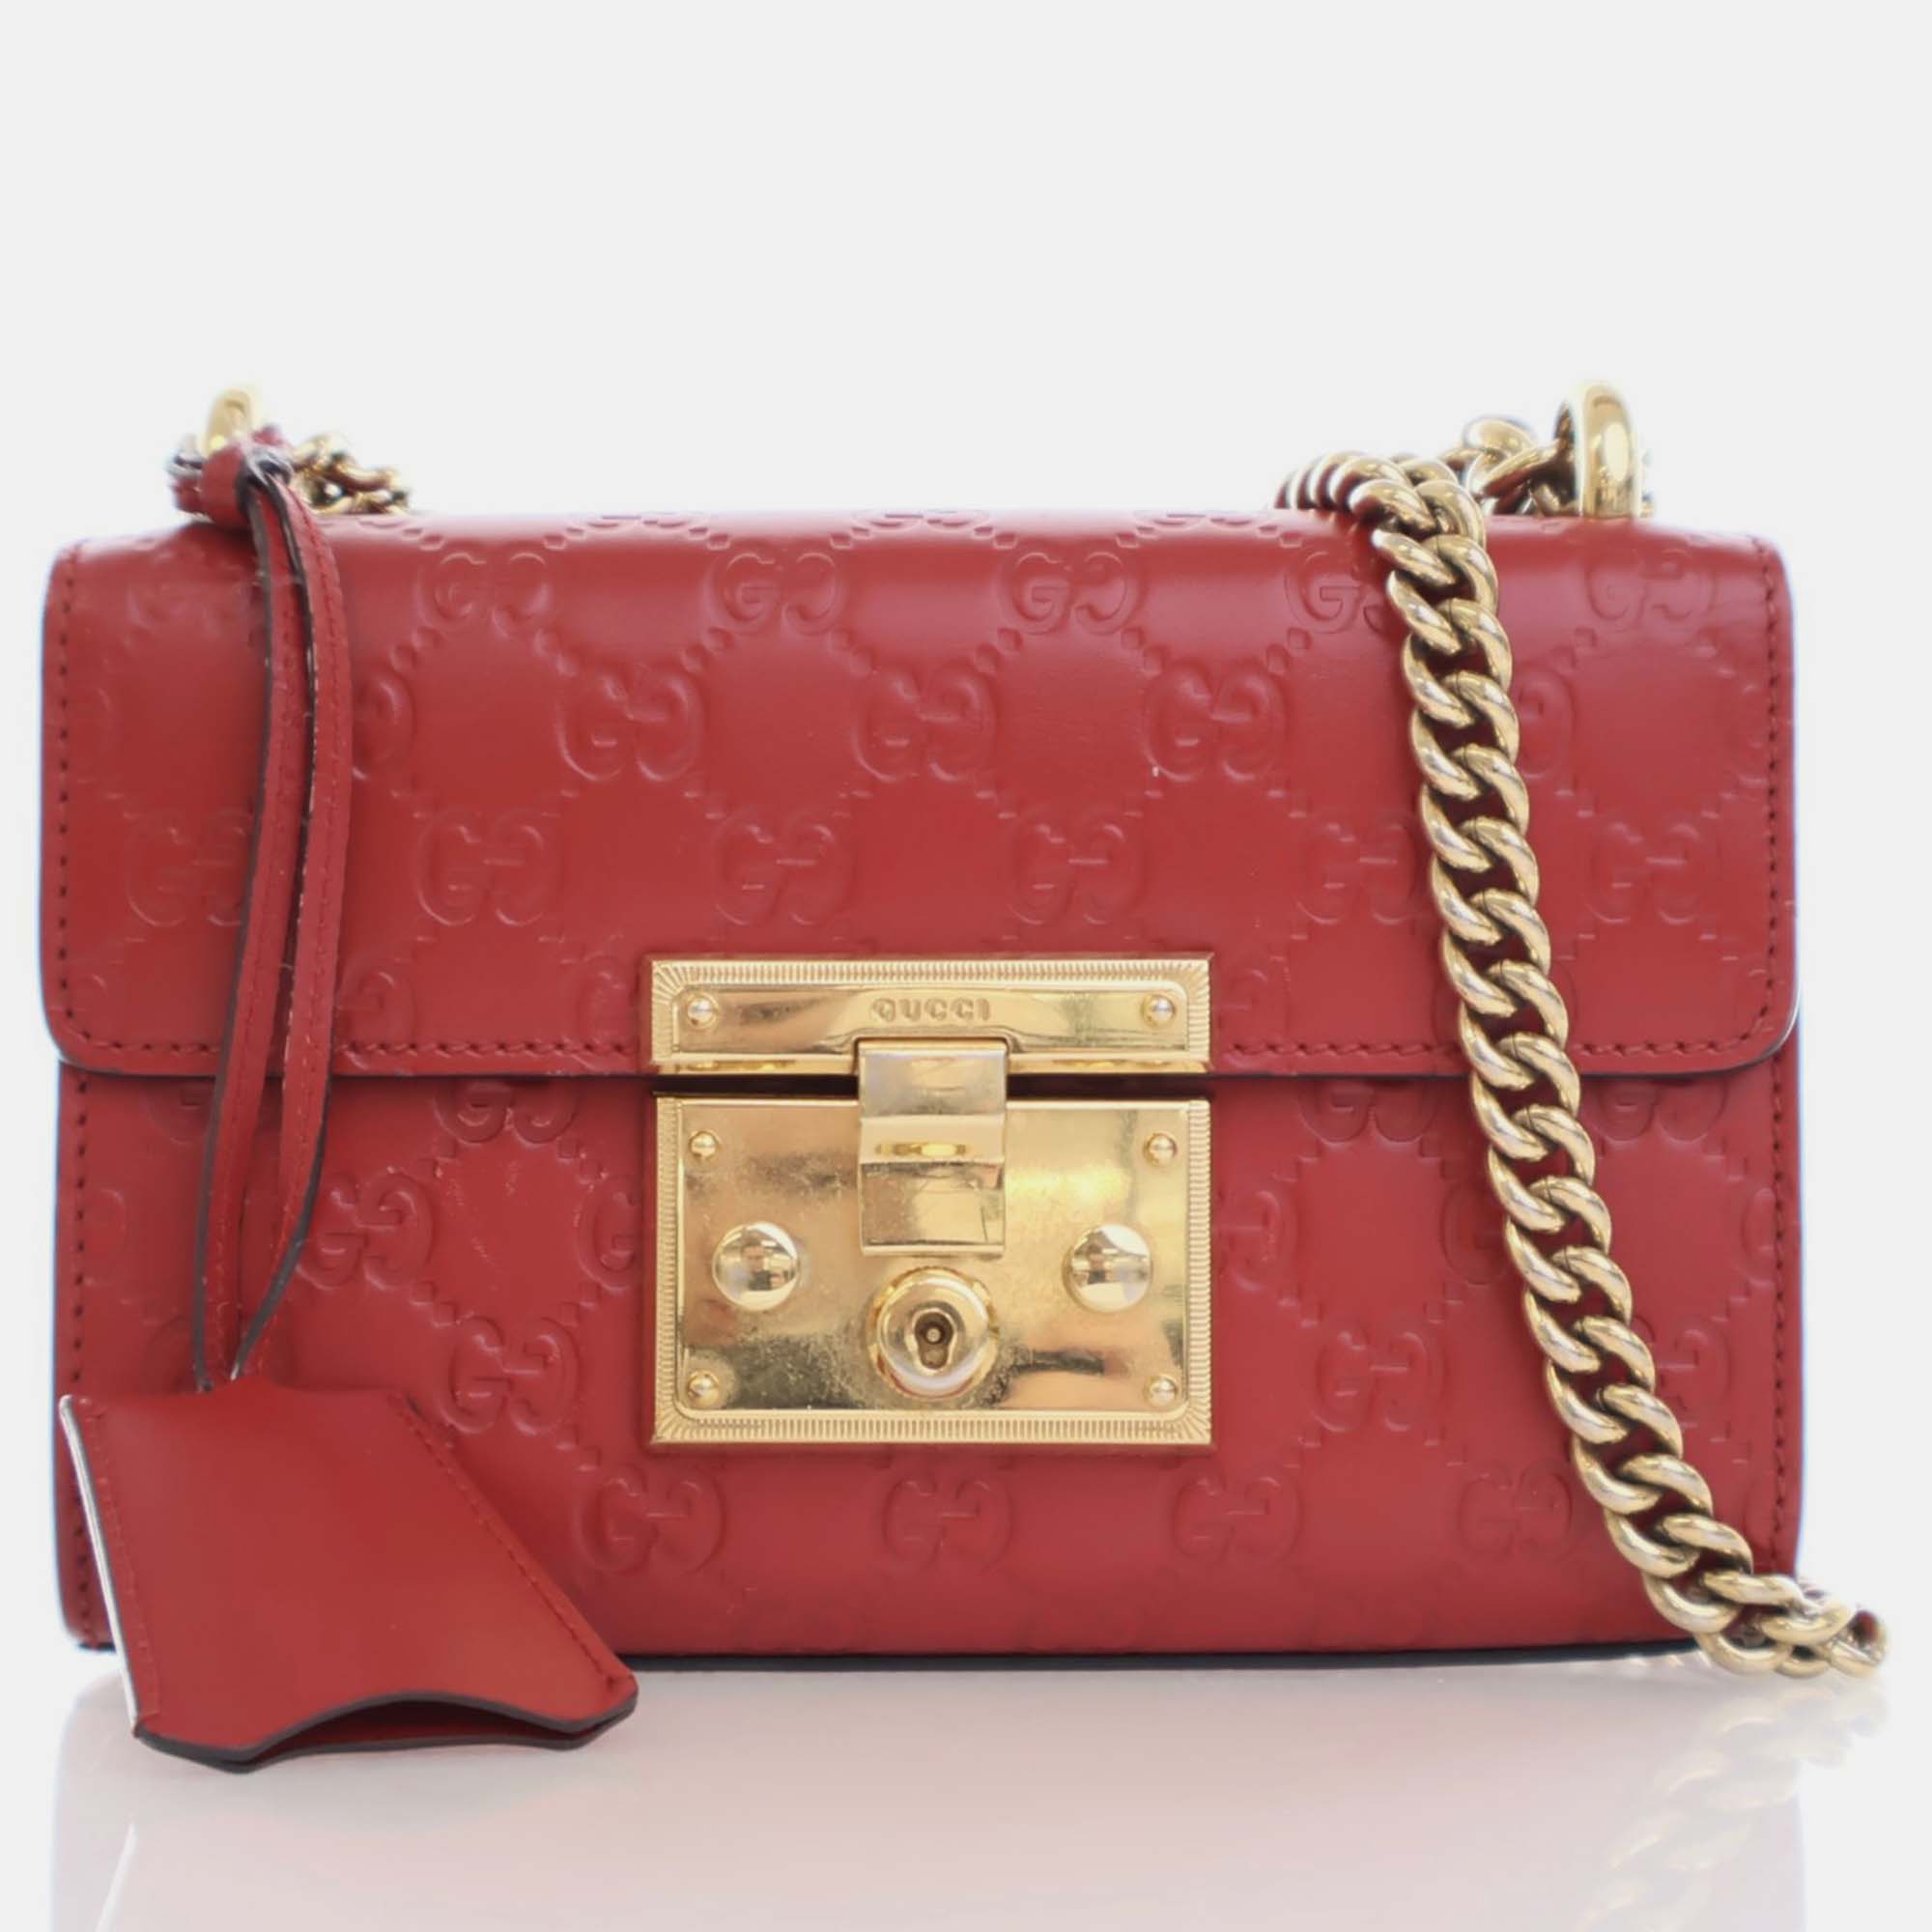 Gucci red leather small guccissima padlock shoulder bag